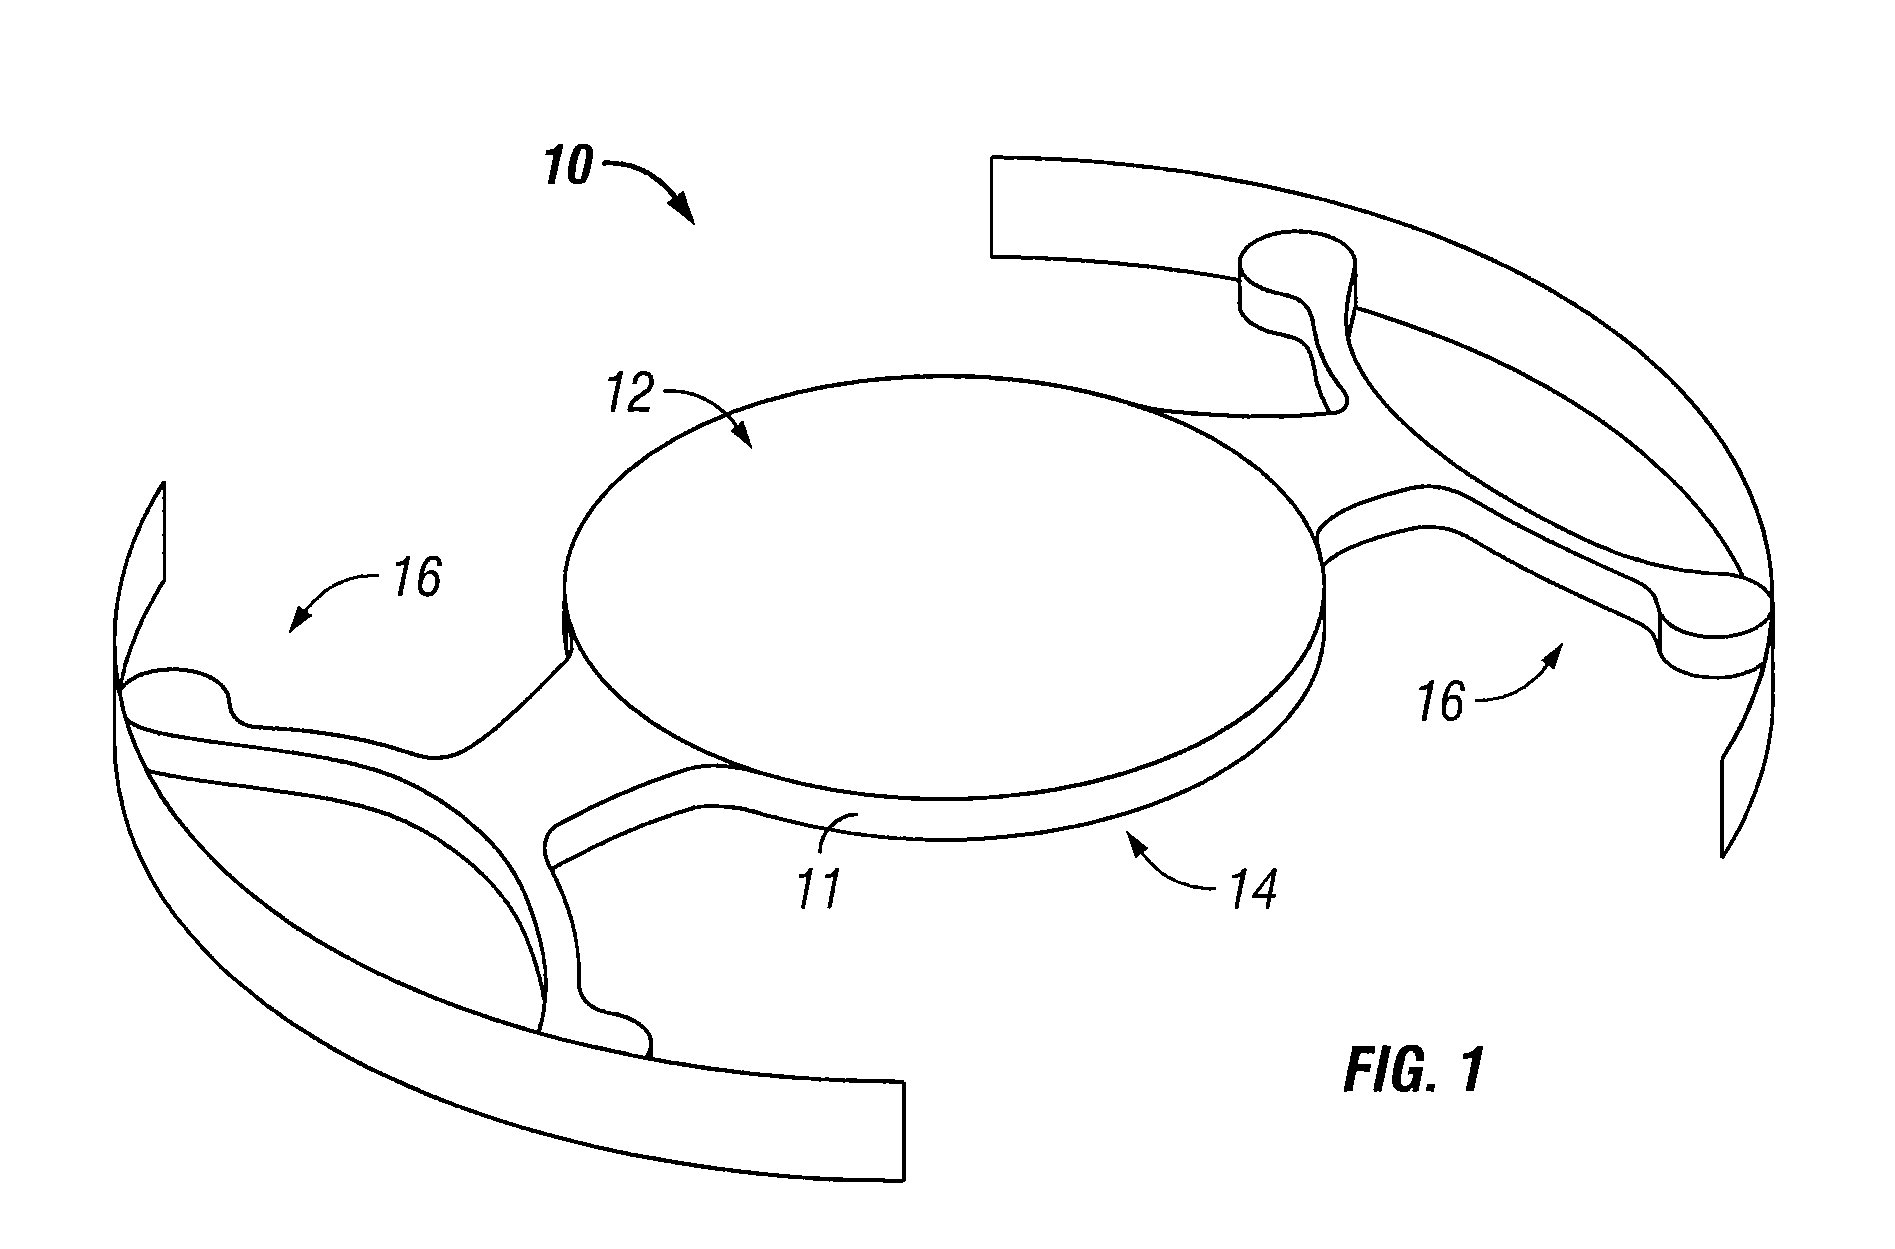 Intraocular lens configured to offset optical effects caused by optic deformation